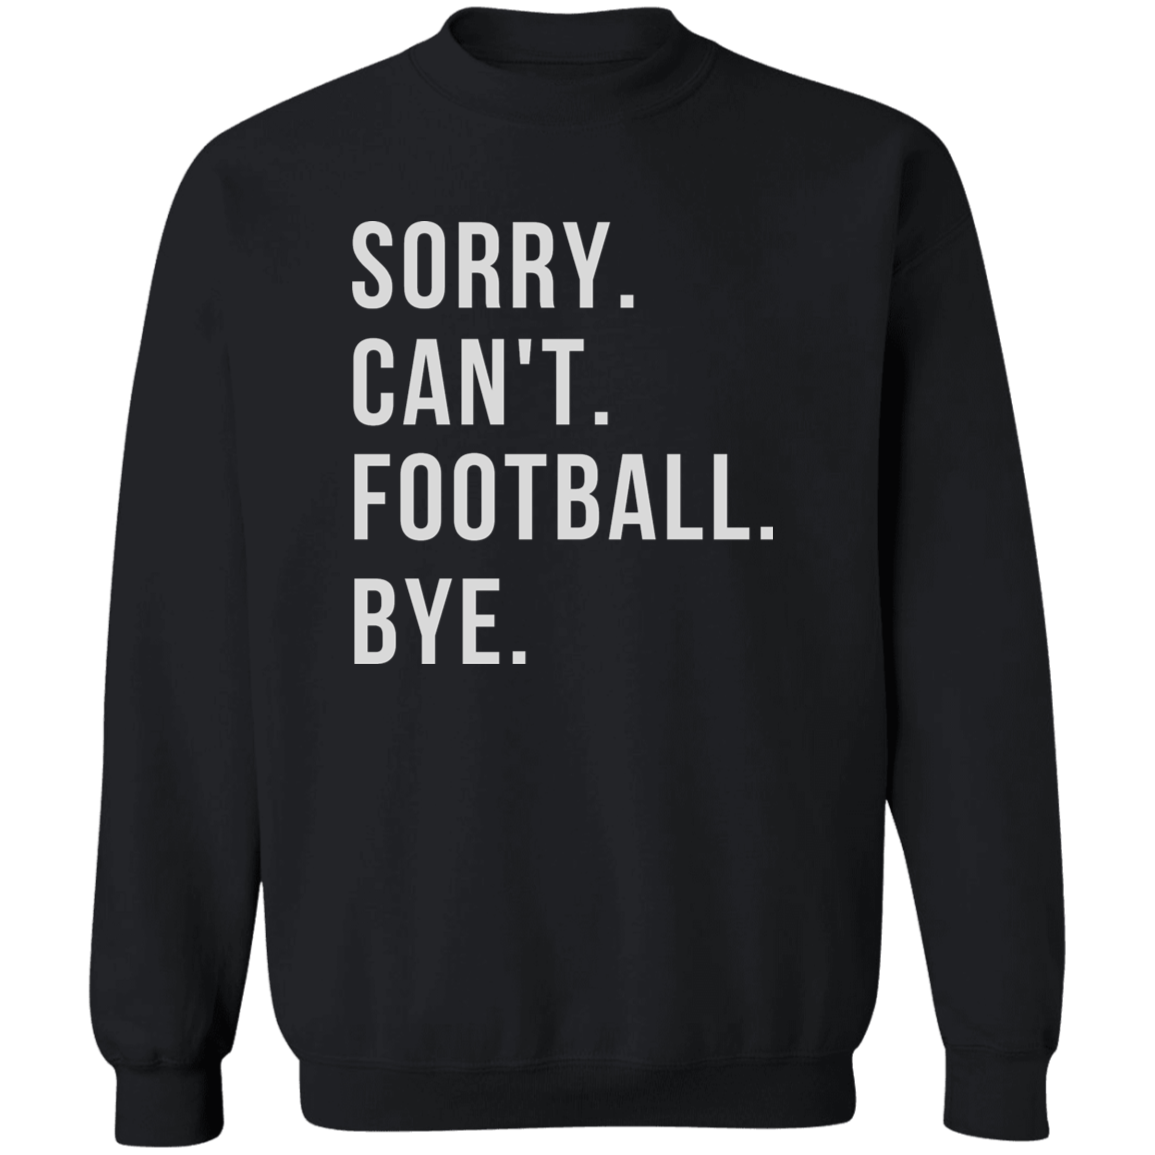 Sorry. Can't. Football. Bye. Shirt